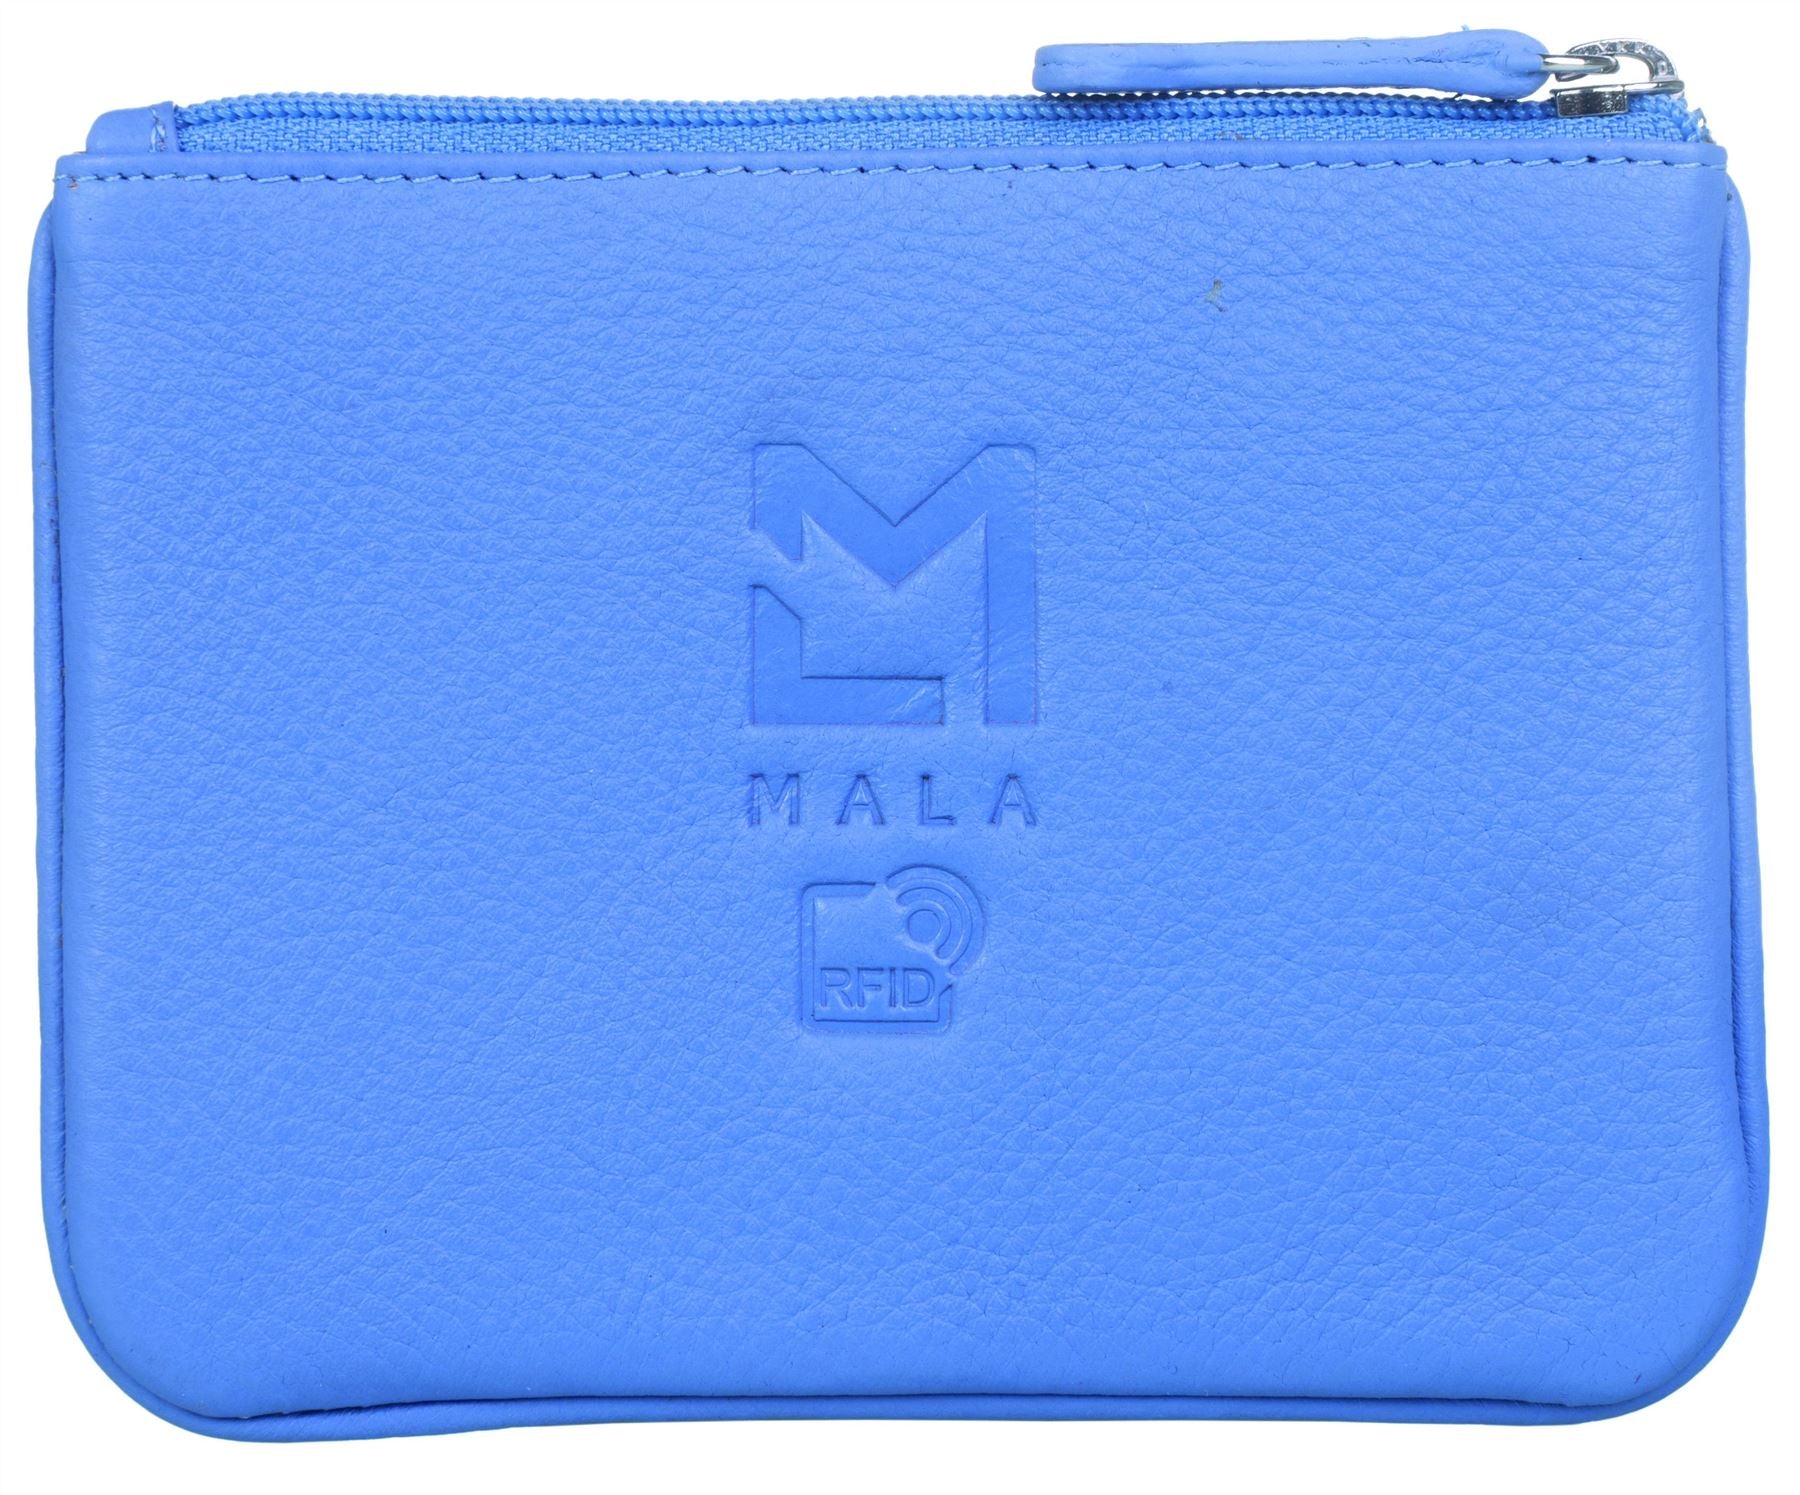 Quality Ladies Soft Leather RFID Protection Purse Wallet by Mala Origin  Collection Gift Boxed | Purse wallet, Leather, Wallets for women leather